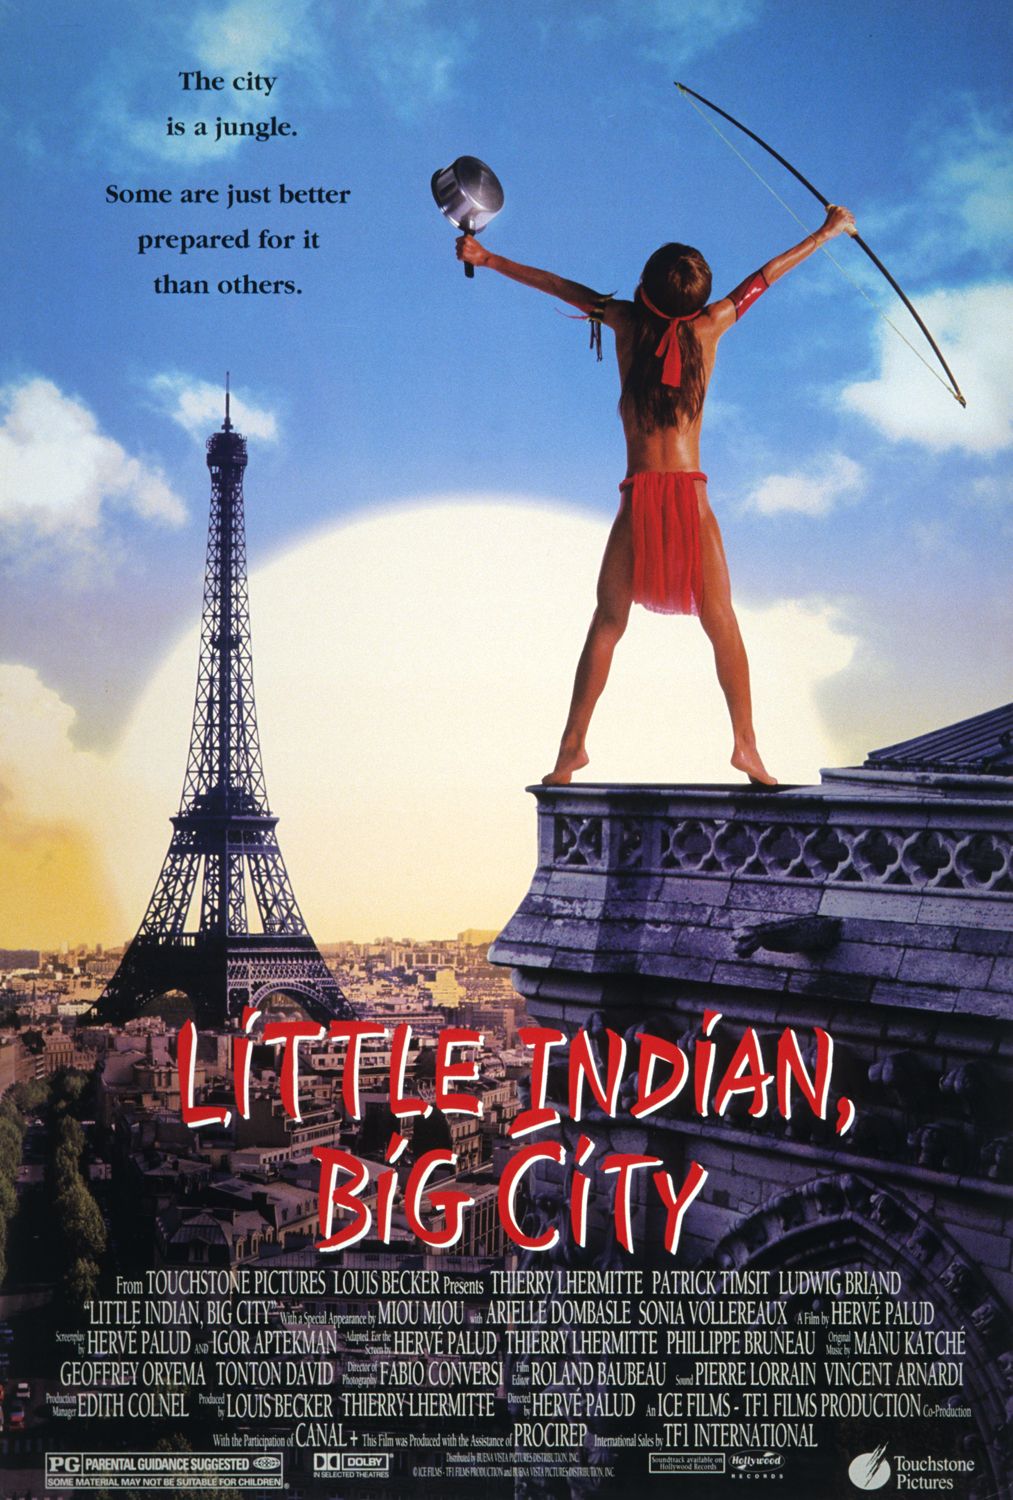 Extra Large Movie Poster Image for Little Indian, Big City 